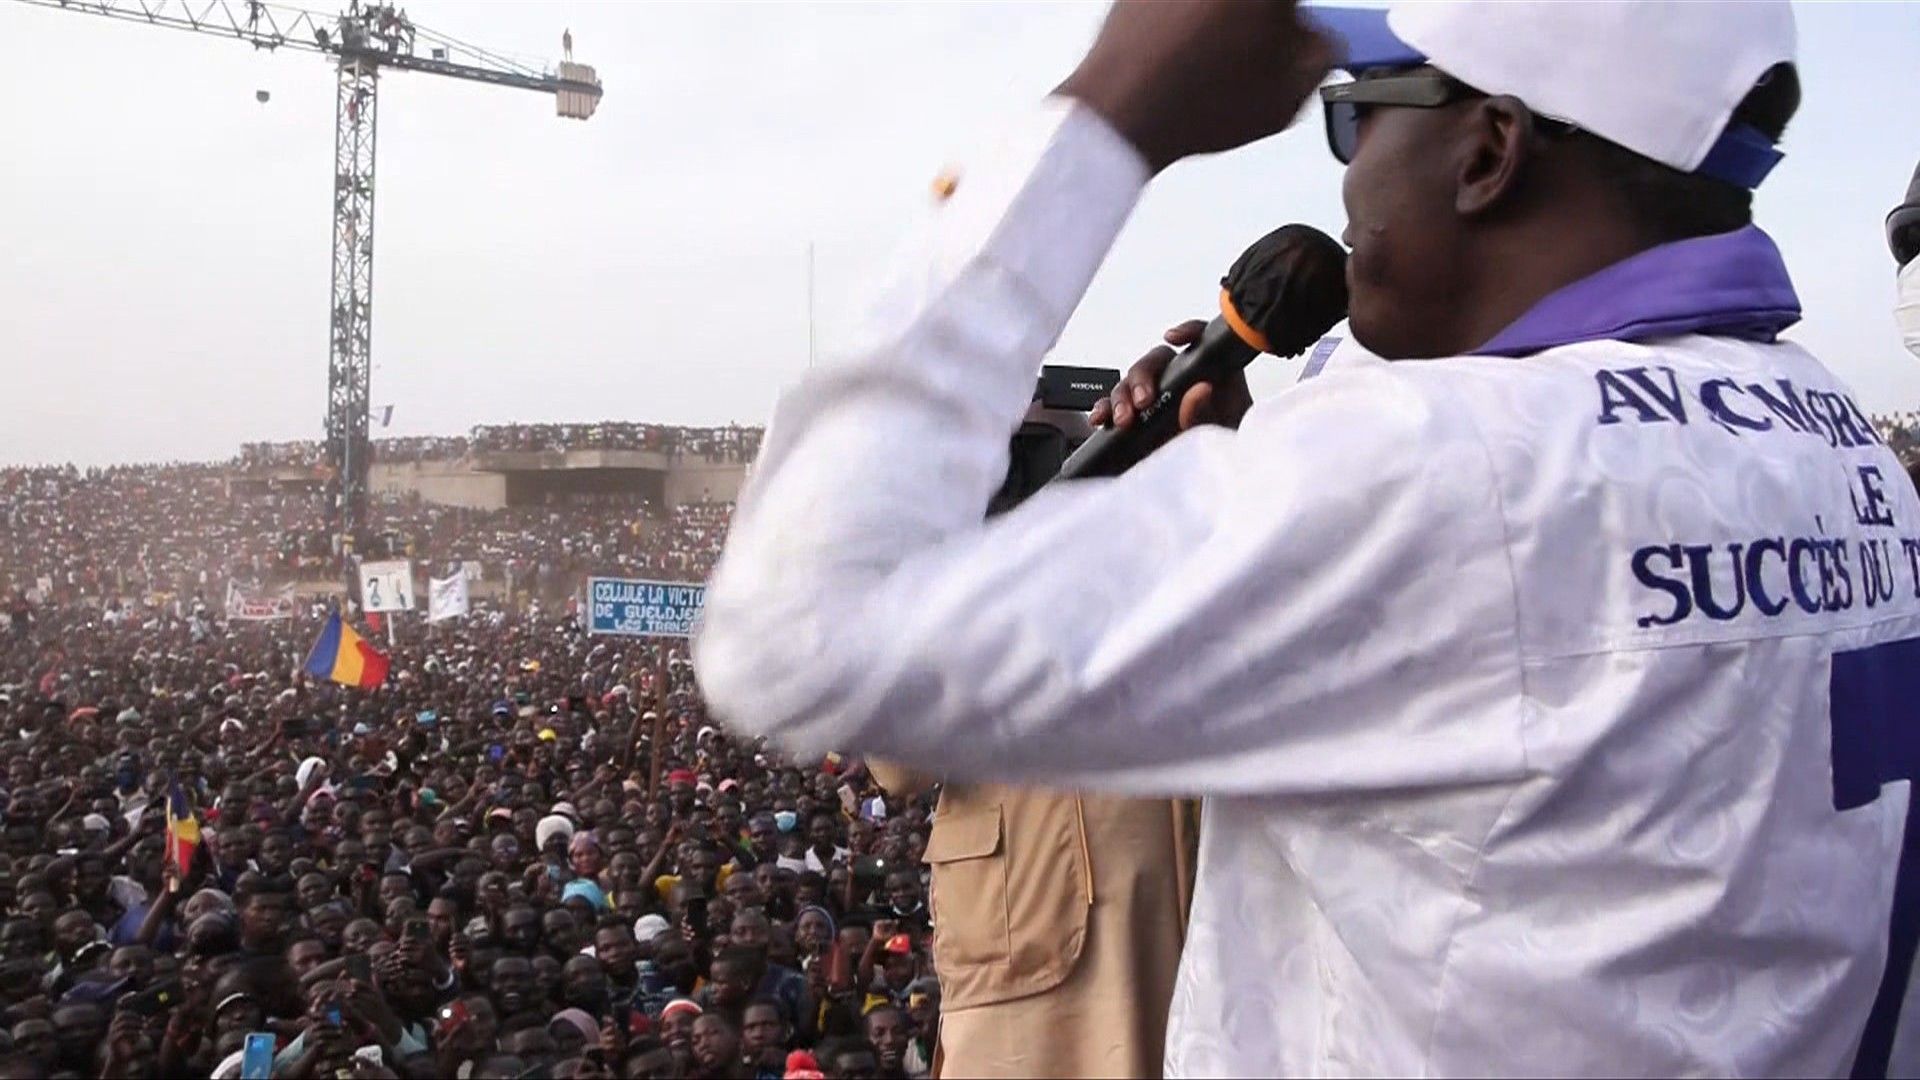 Chad presidential hopeful Masra addresses mass of supporters at campaign rally